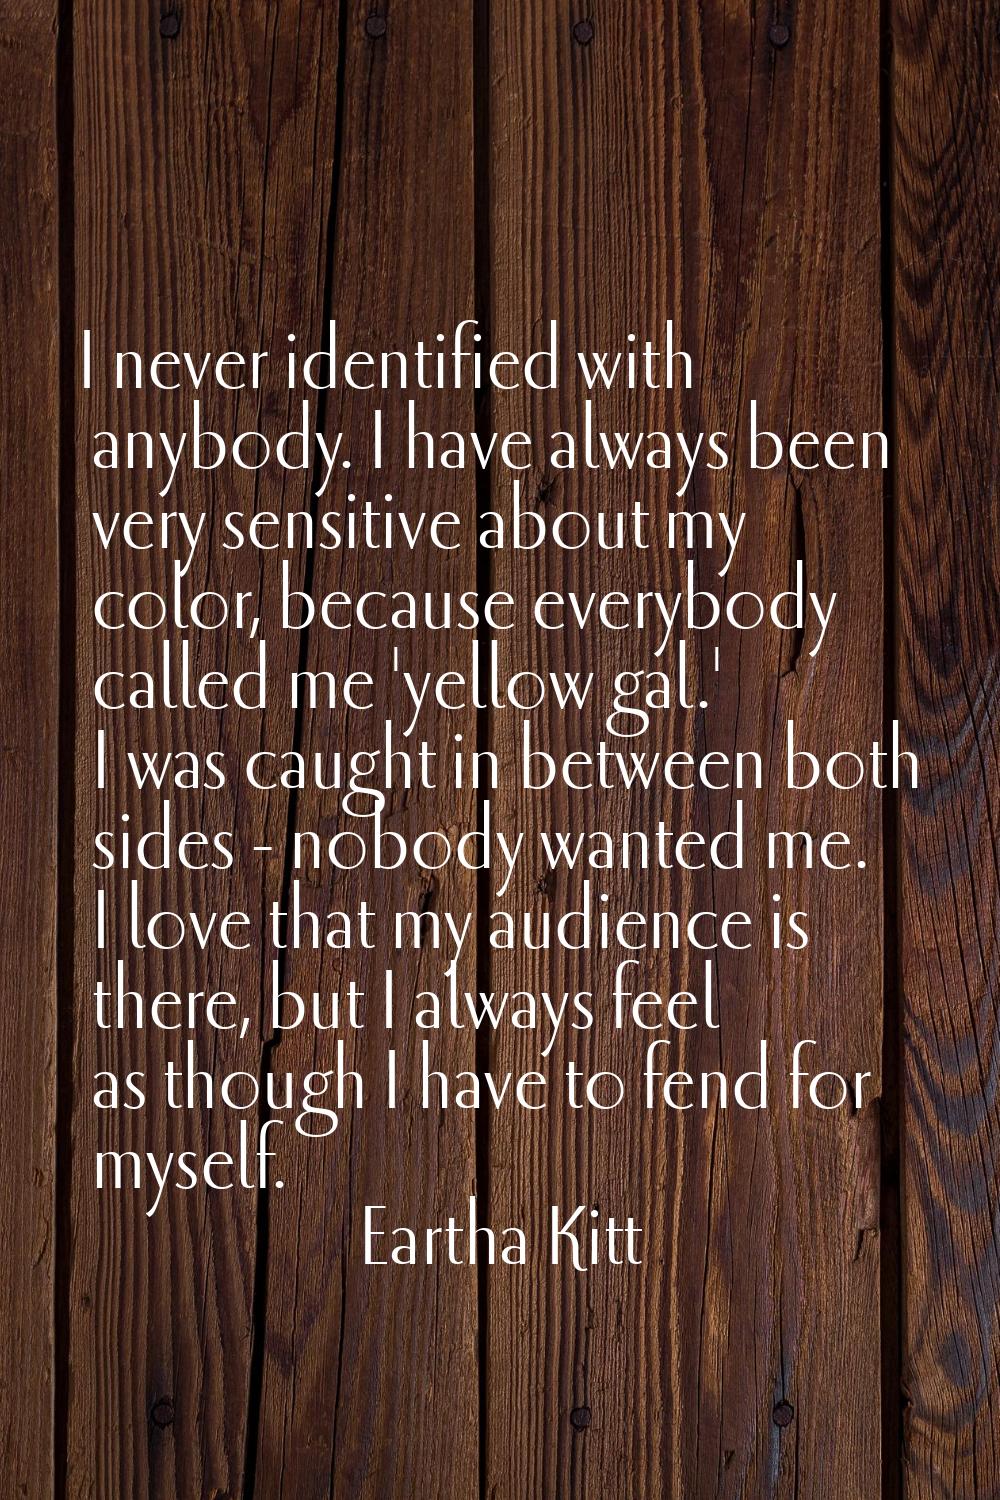 I never identified with anybody. I have always been very sensitive about my color, because everybod